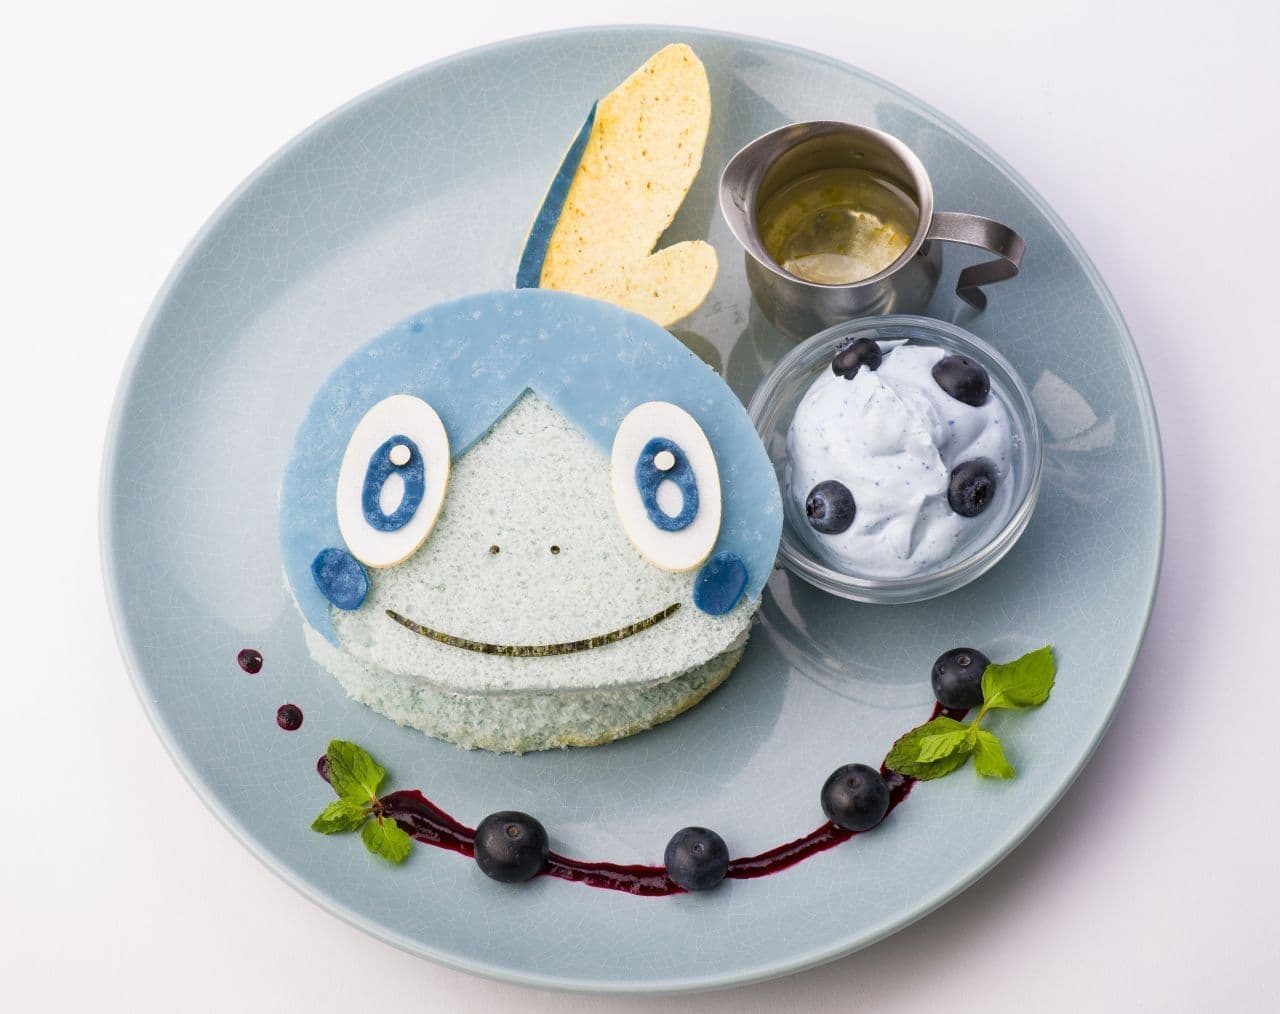 A new menu inspired by the Pokemon that appears in "Pokemon Sword Shield at Pokemon Cafe"